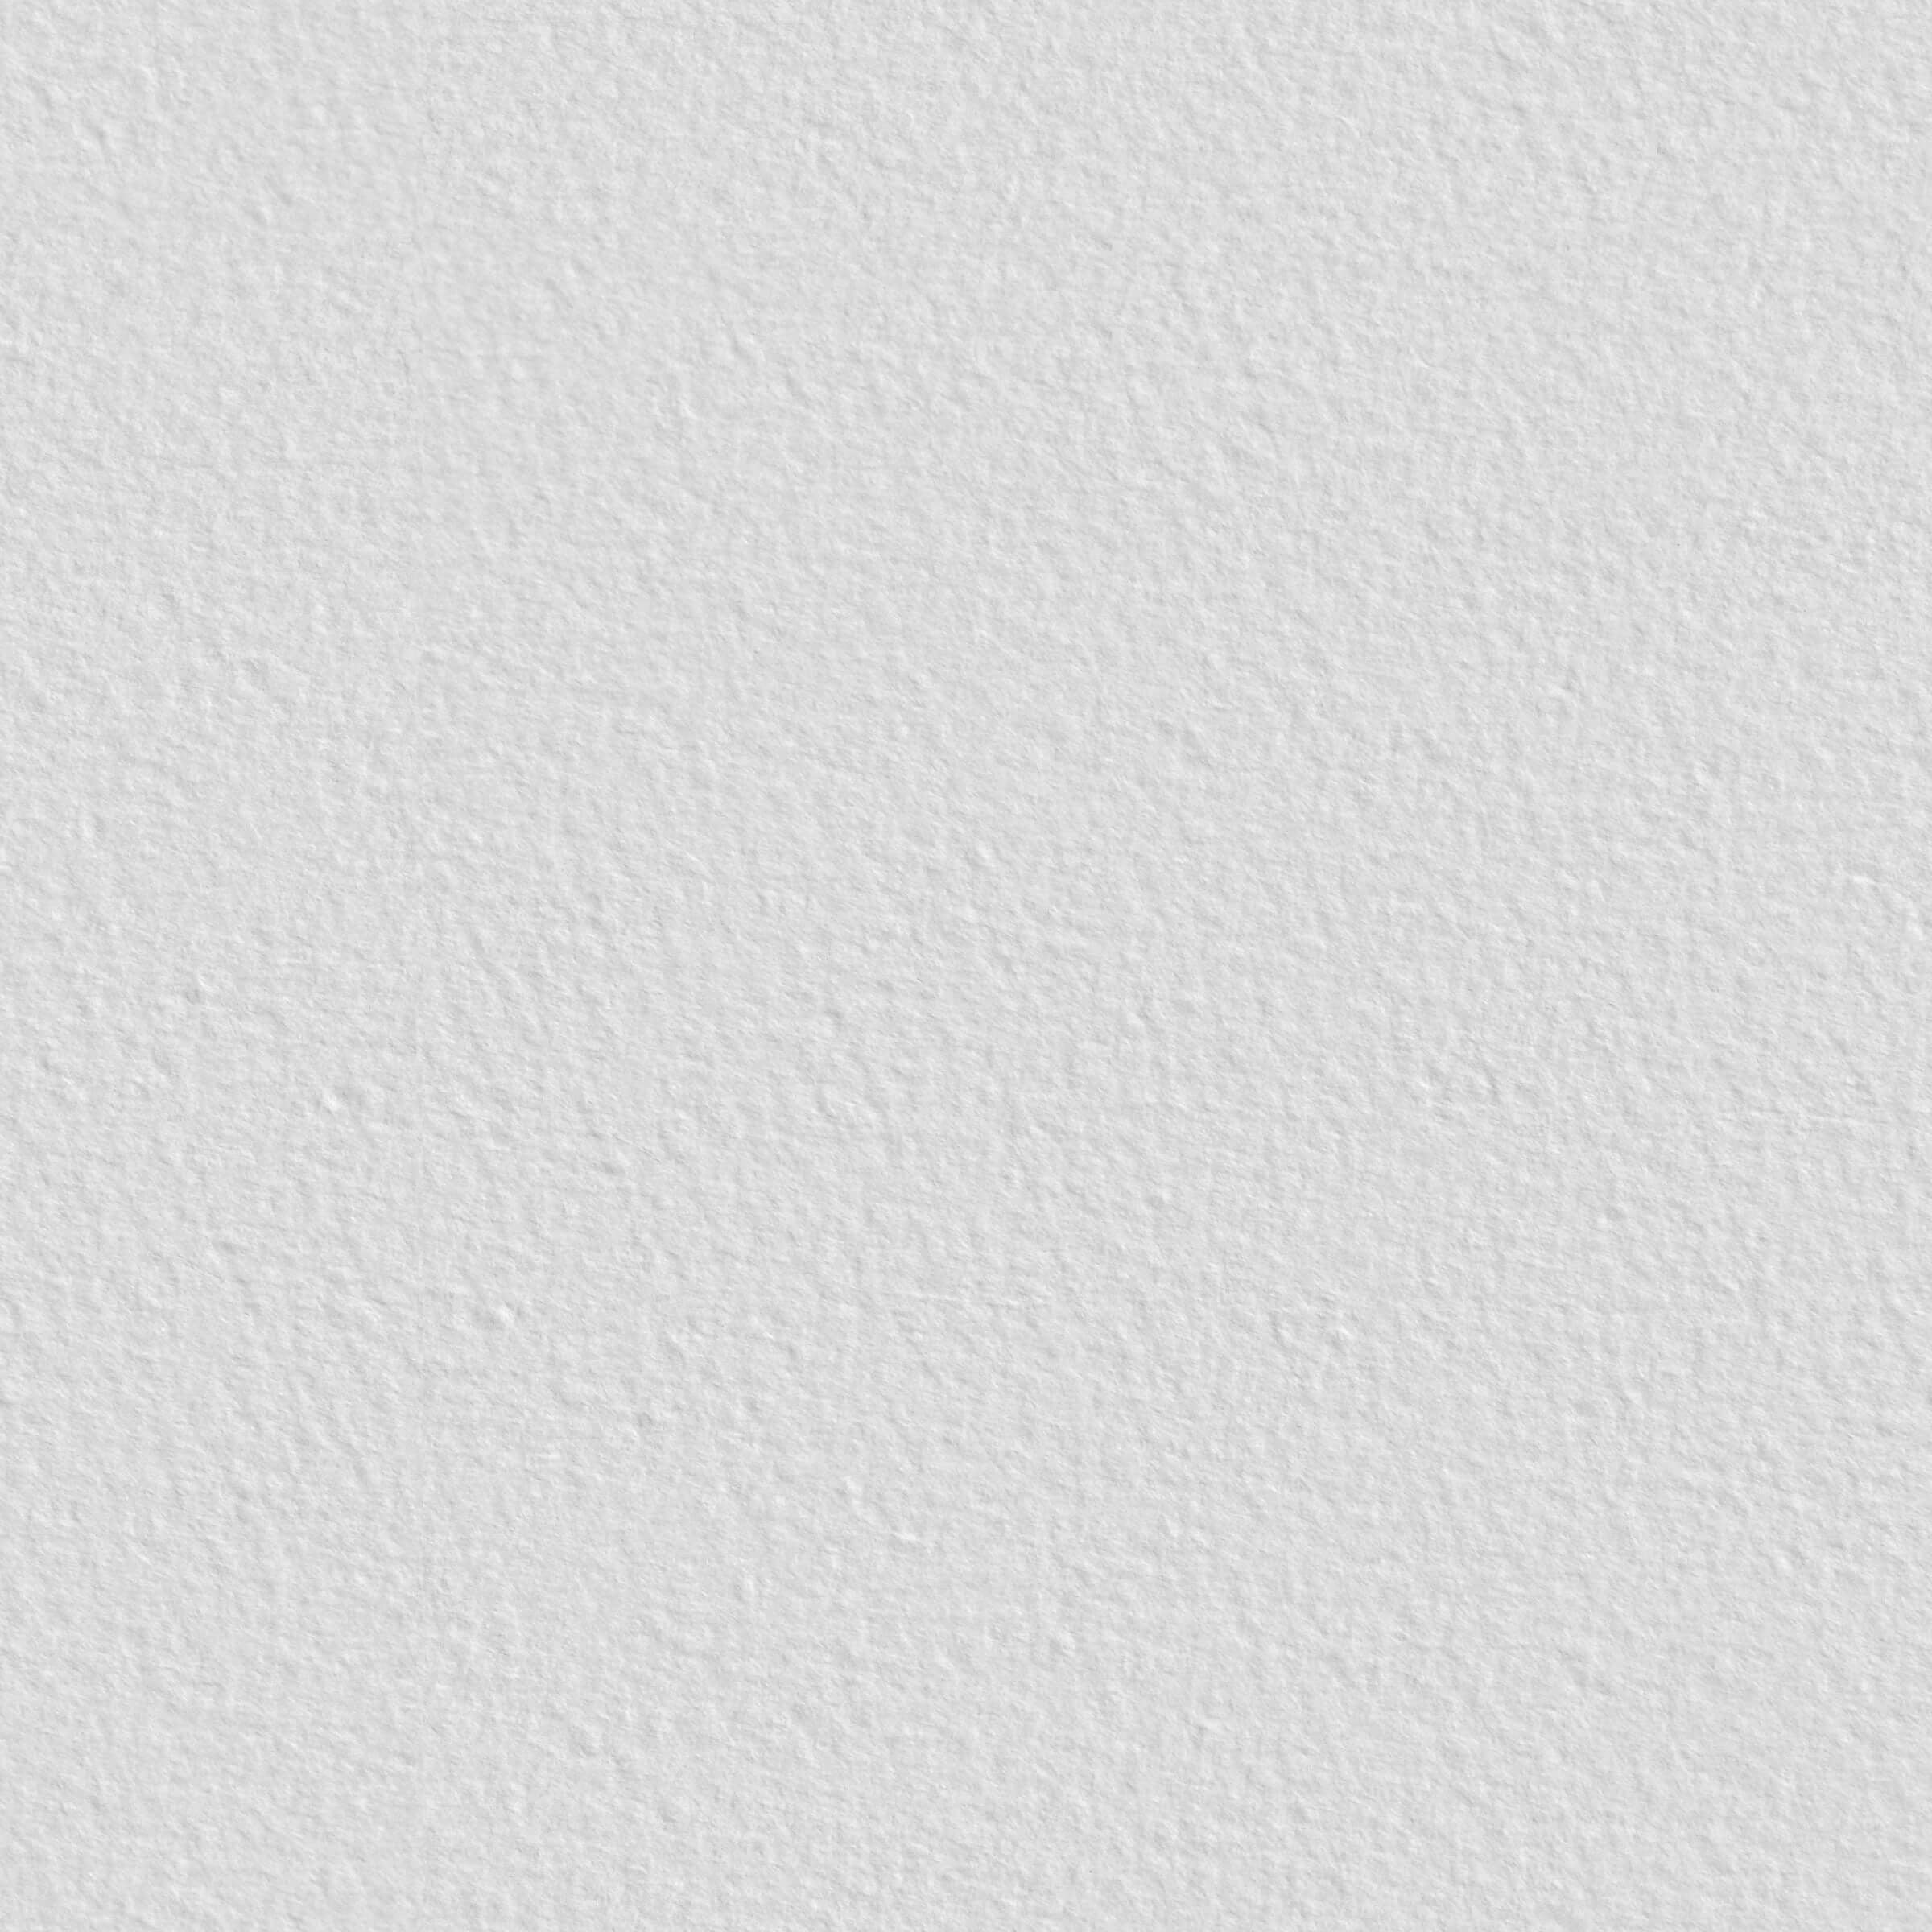 Watercolour paper – Free Seamless Textures - All rights reseved